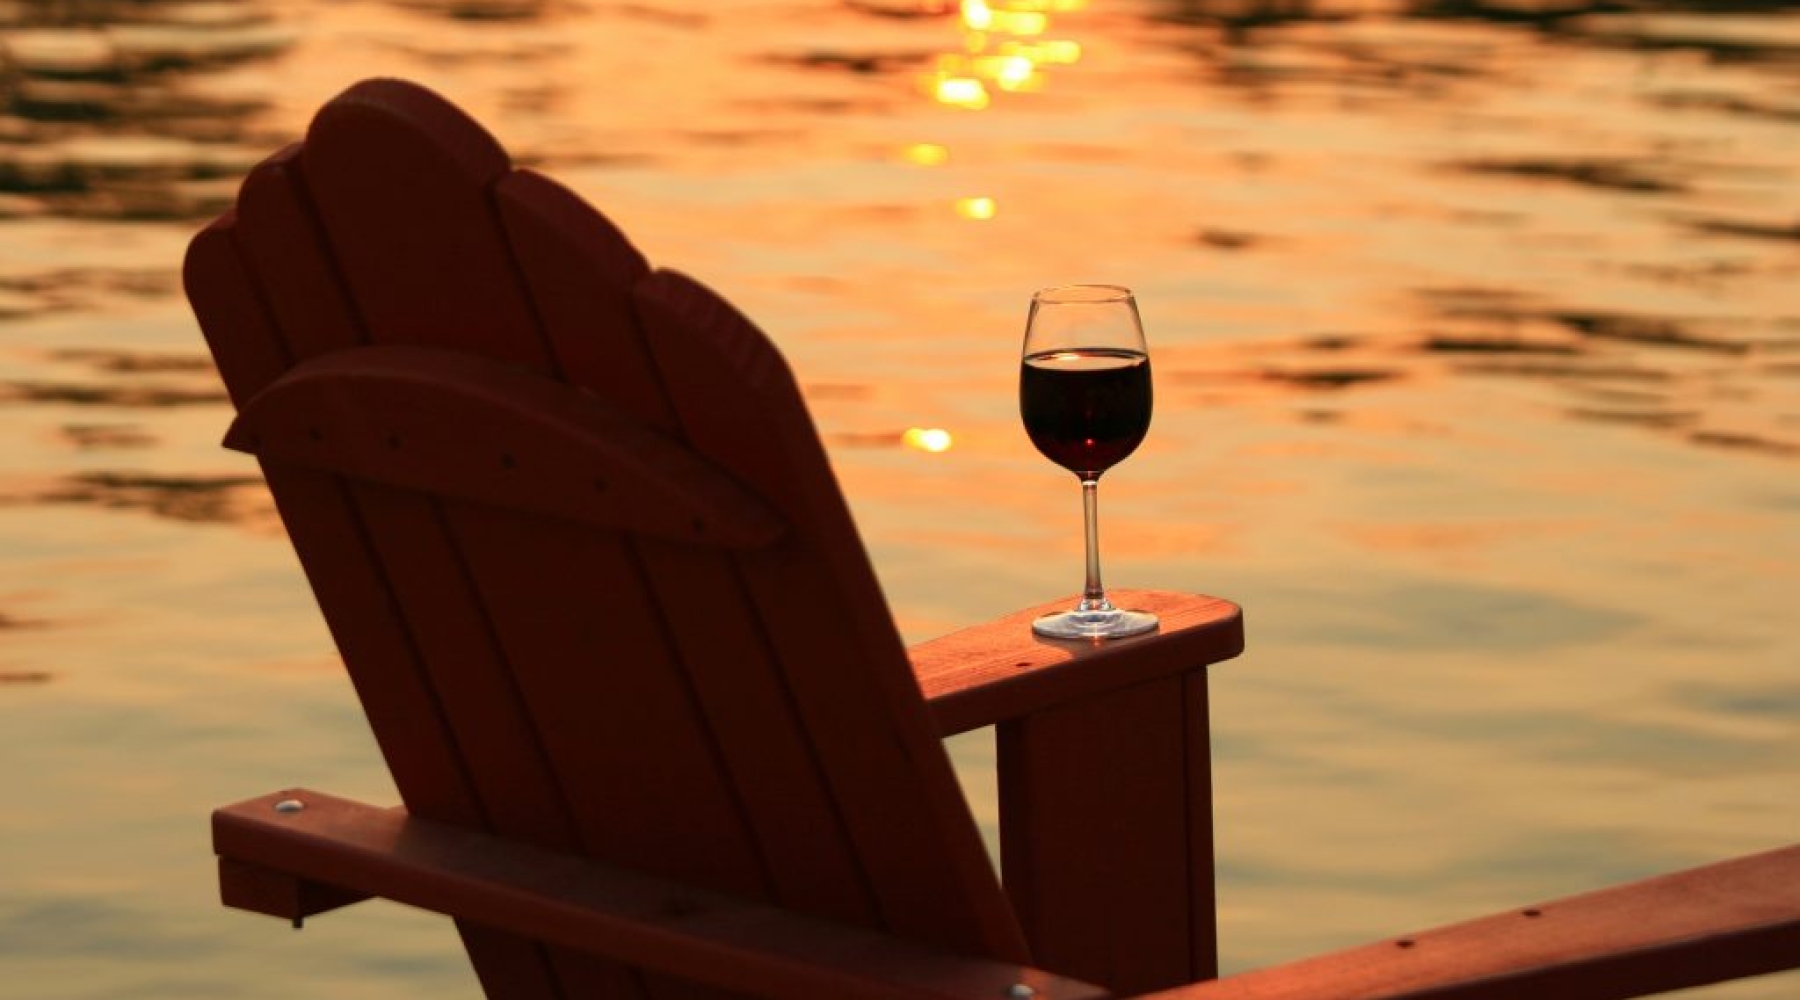 Beach Chair and Wine by the Water